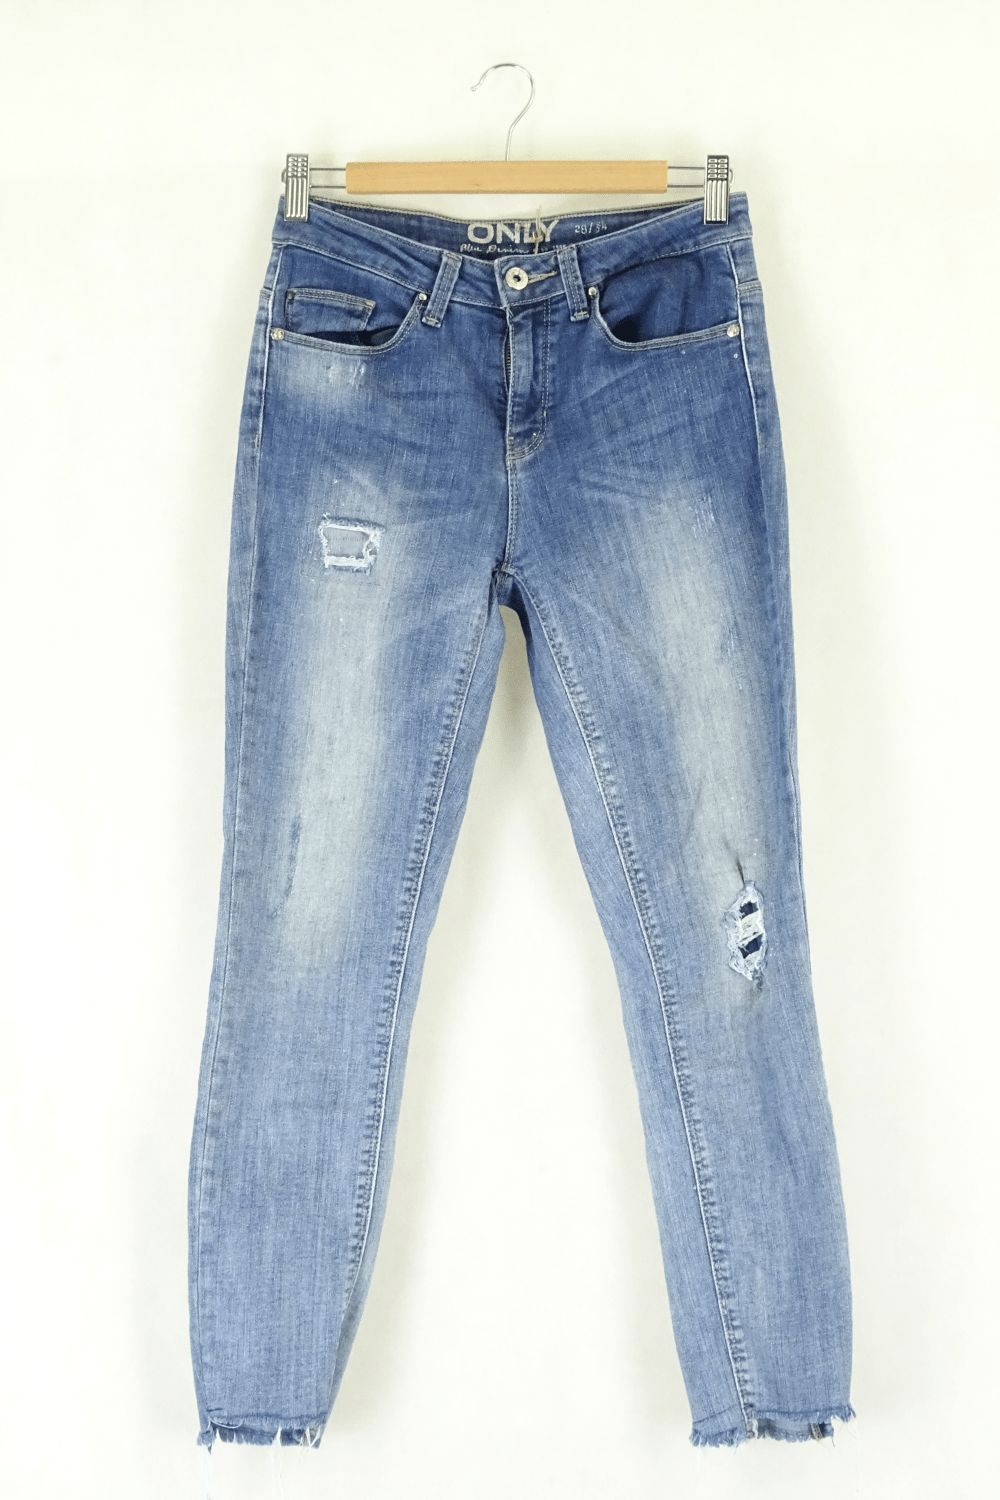 Only Jeans 28/34